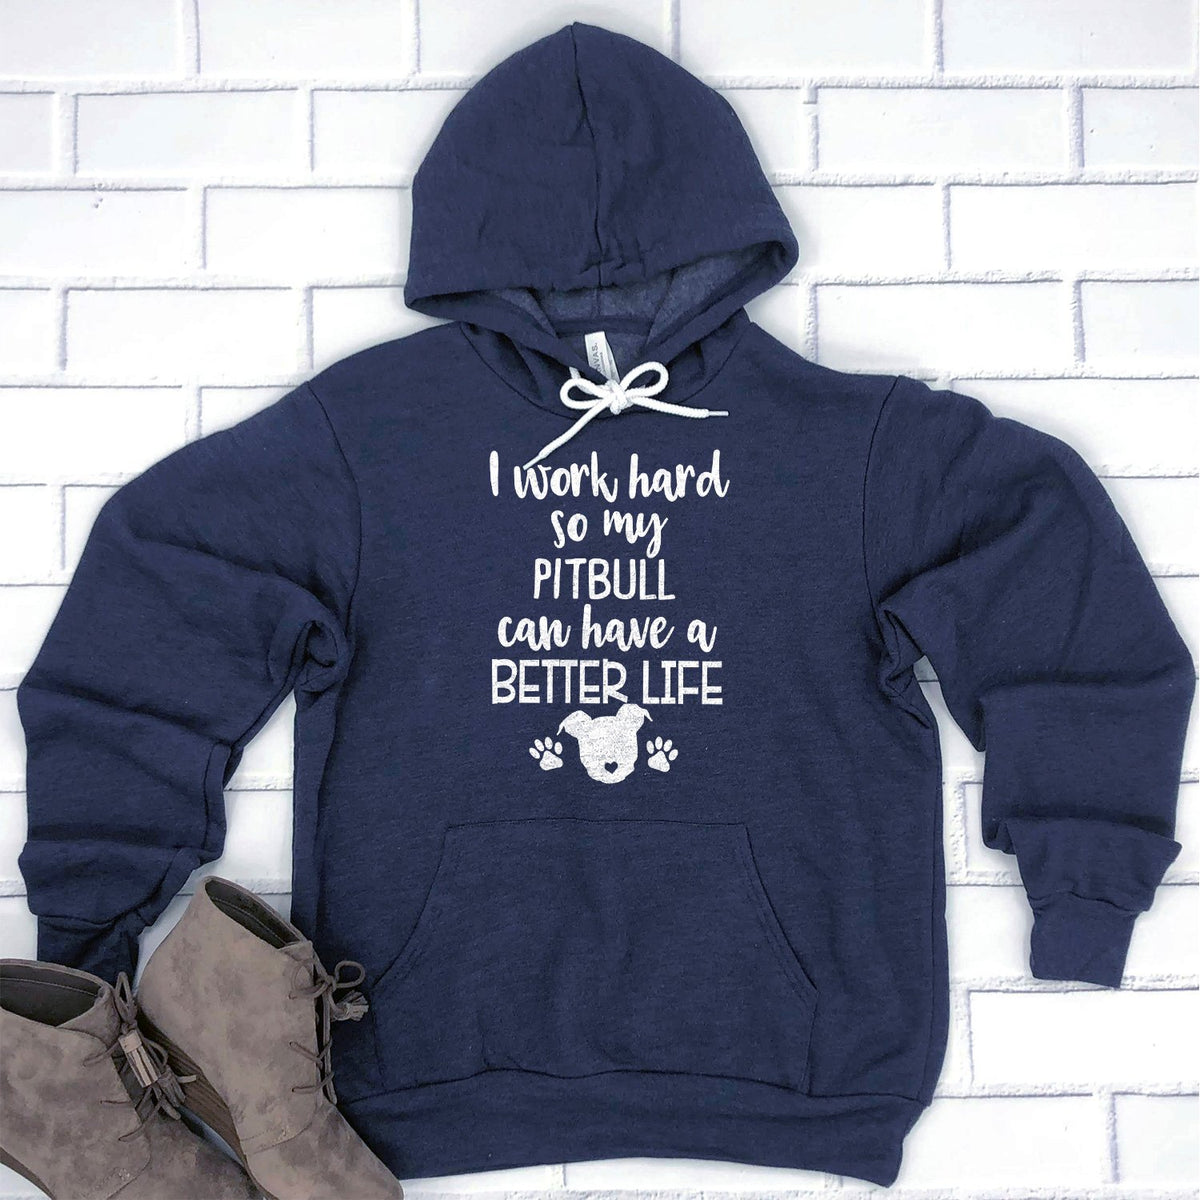 I Work Hard So My Pitbull Can Have A Better Life - Hoodie Sweatshirt